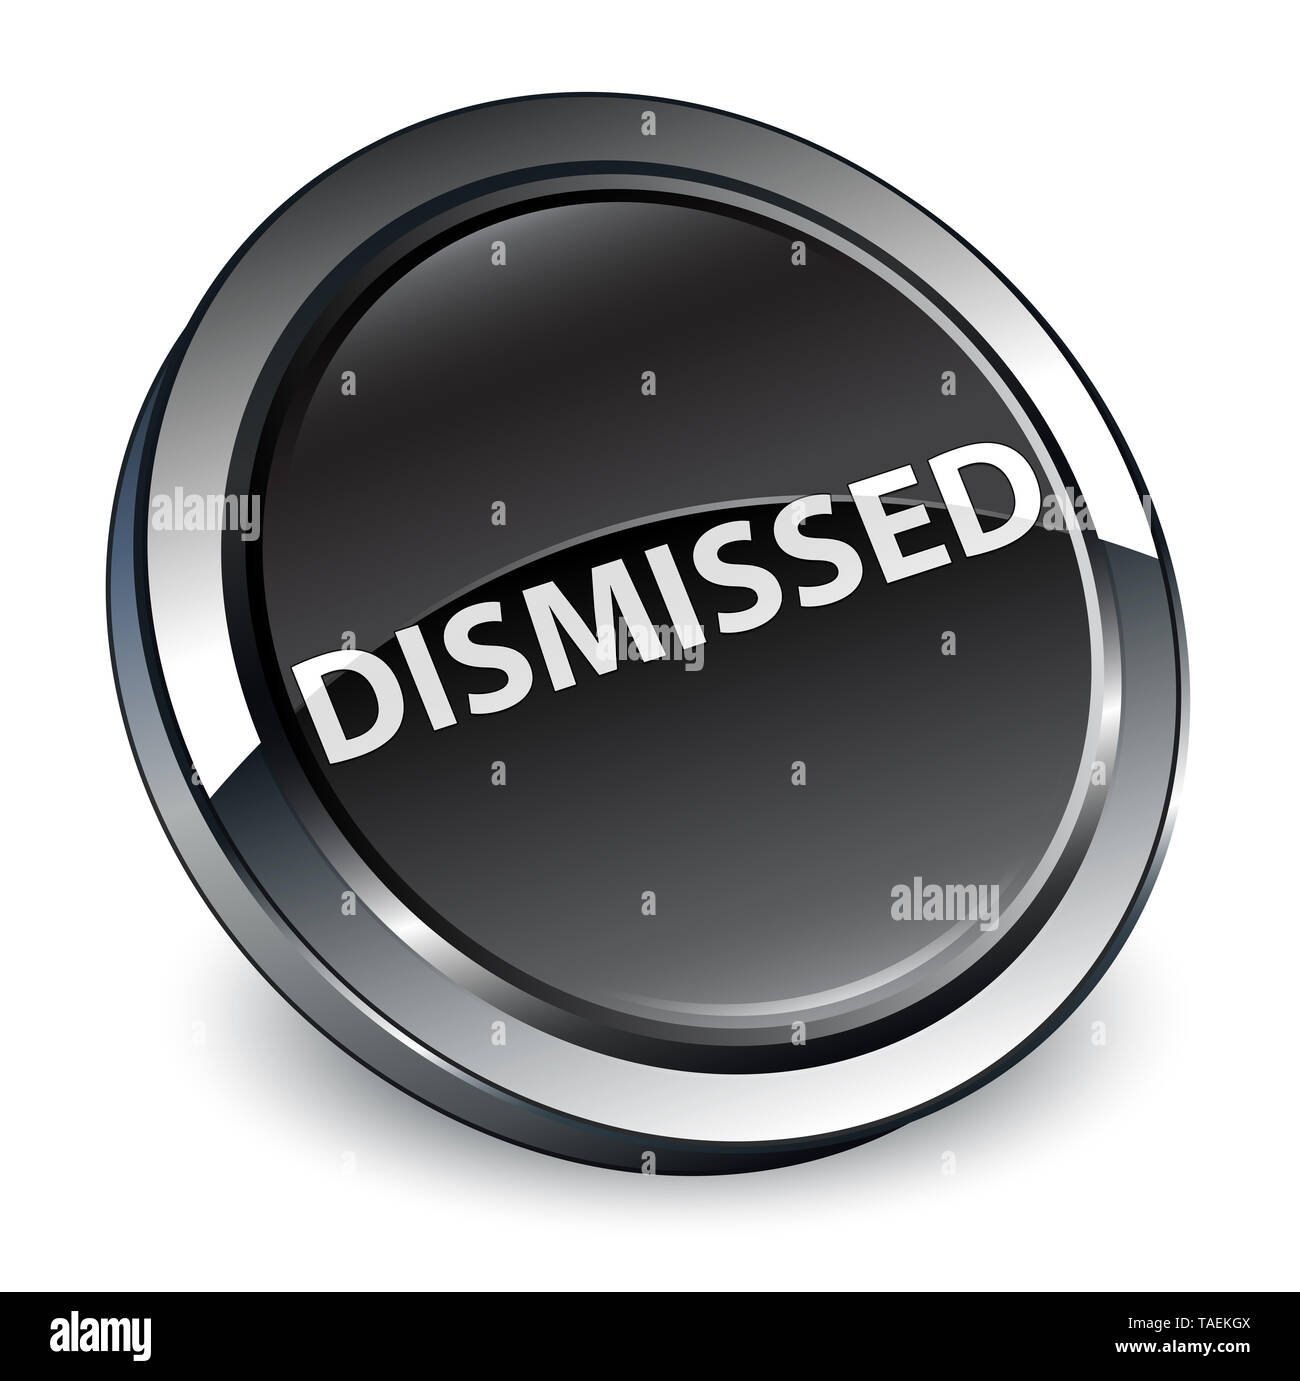 Dismissed isolated on 3d black round button abstract illustration Stock Photo